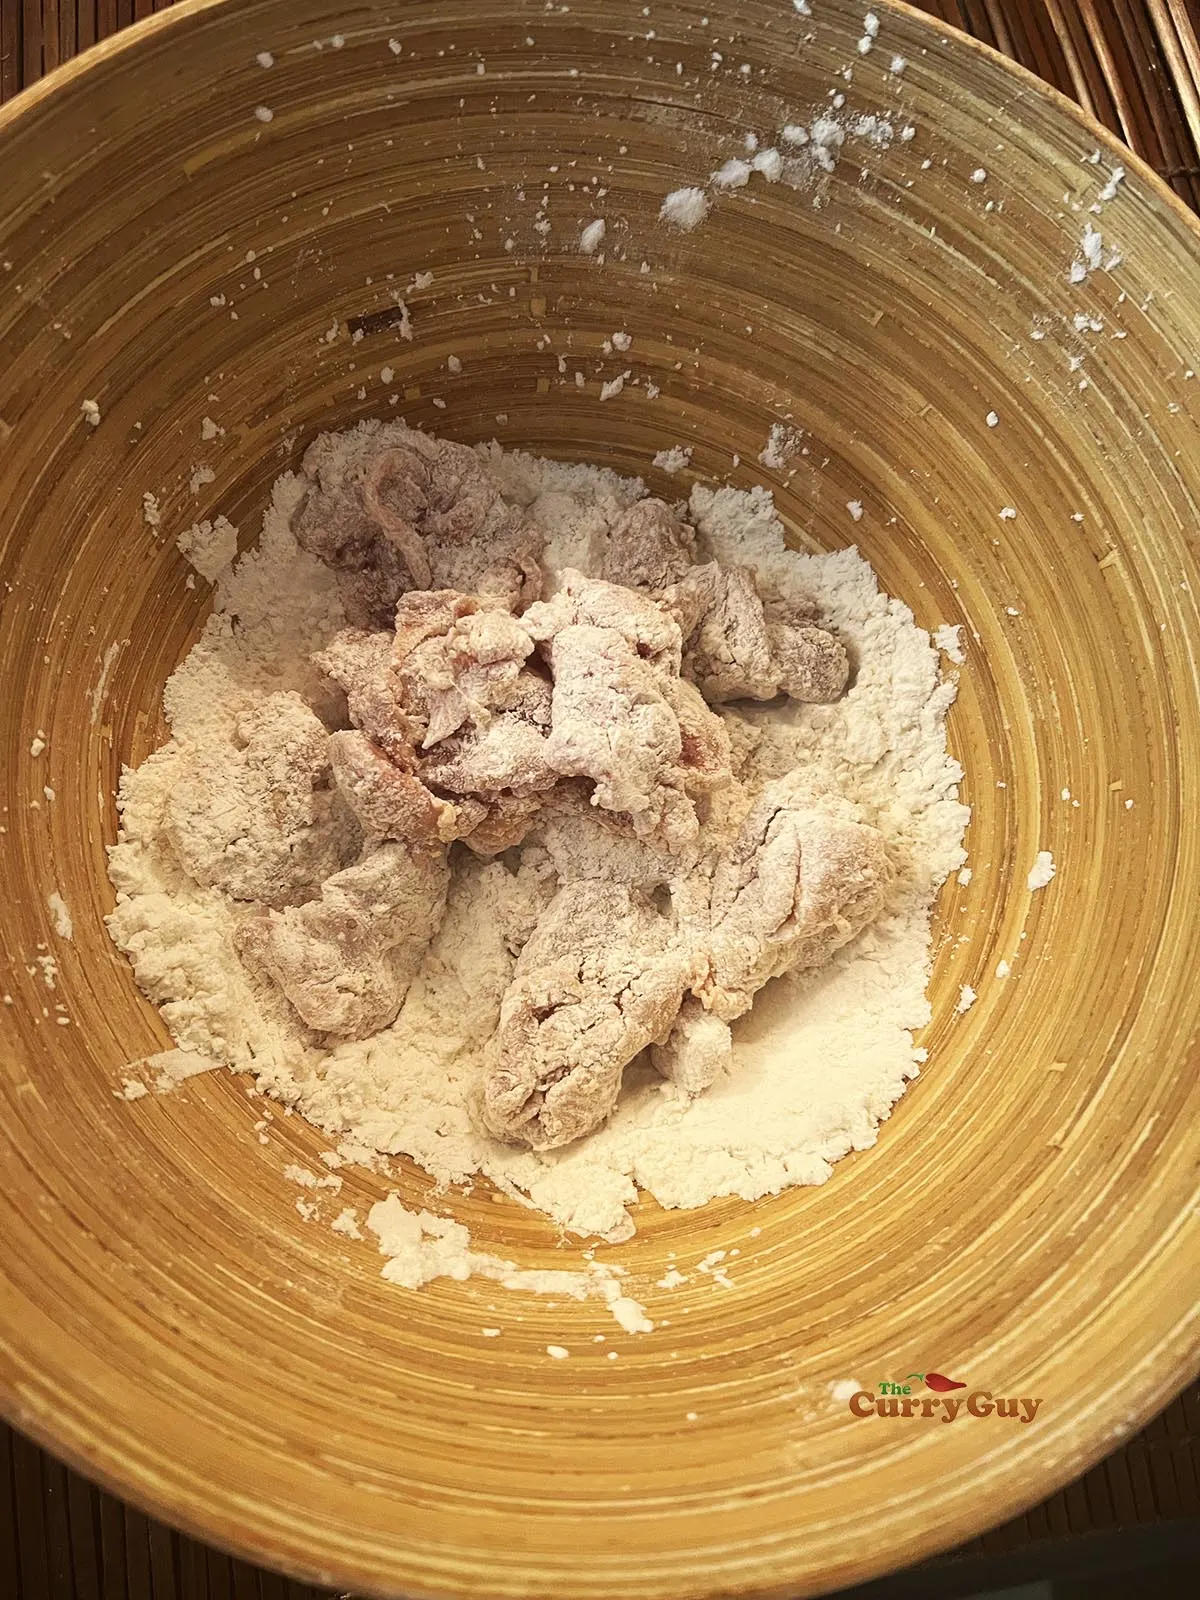 Coating the marinated chicken with flour